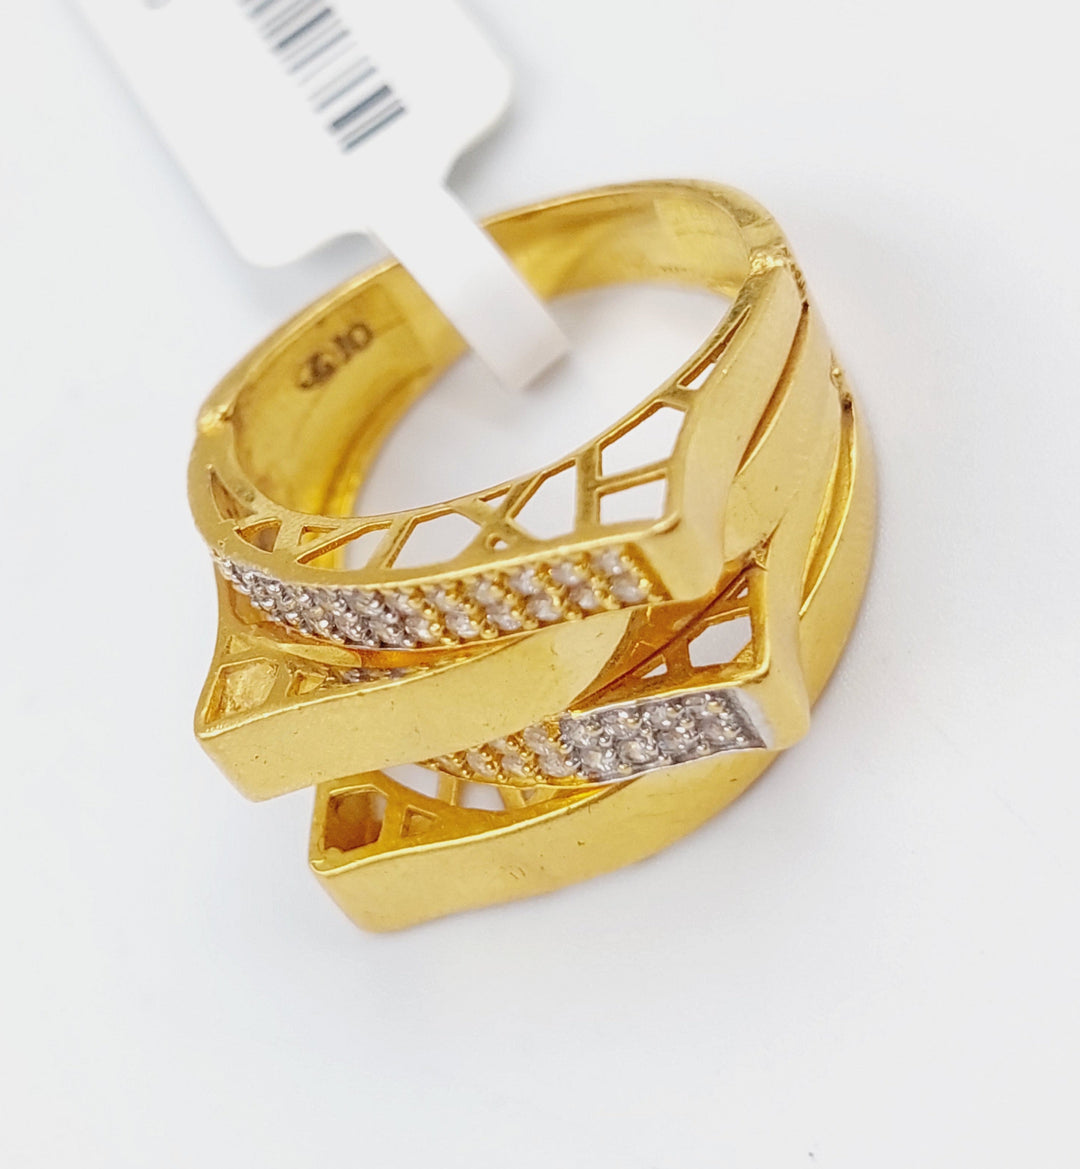 21K Fancy Ring Made of 21K Yellow Gold by Saeed Jewelry-15018